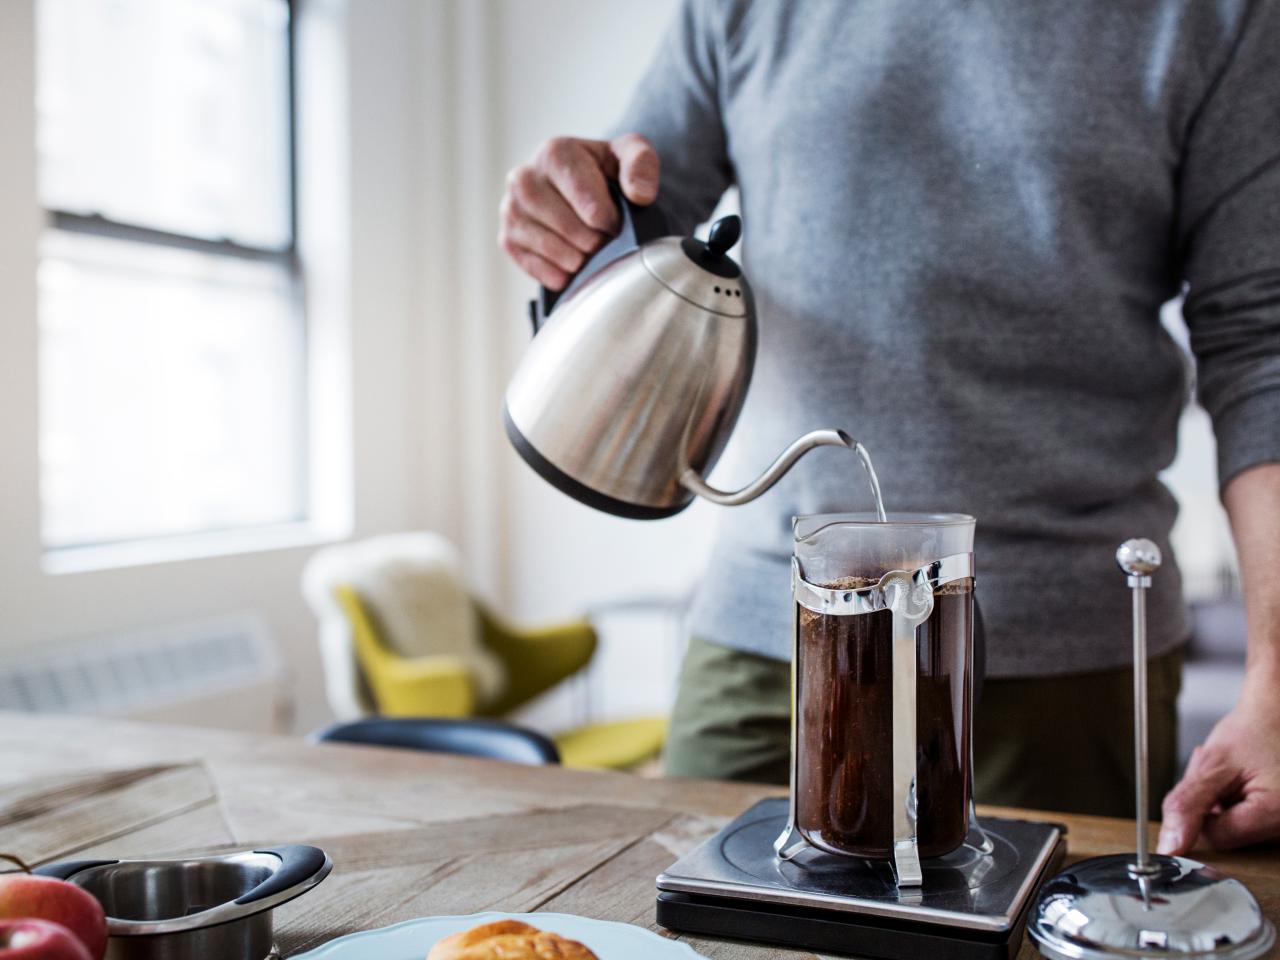 https://food.fnr.sndimg.com/content/dam/images/food/fullset/2022/08/26/man-pouring-water-into-french-press.jpg.rend.hgtvcom.1280.960.suffix/1661526418547.jpeg